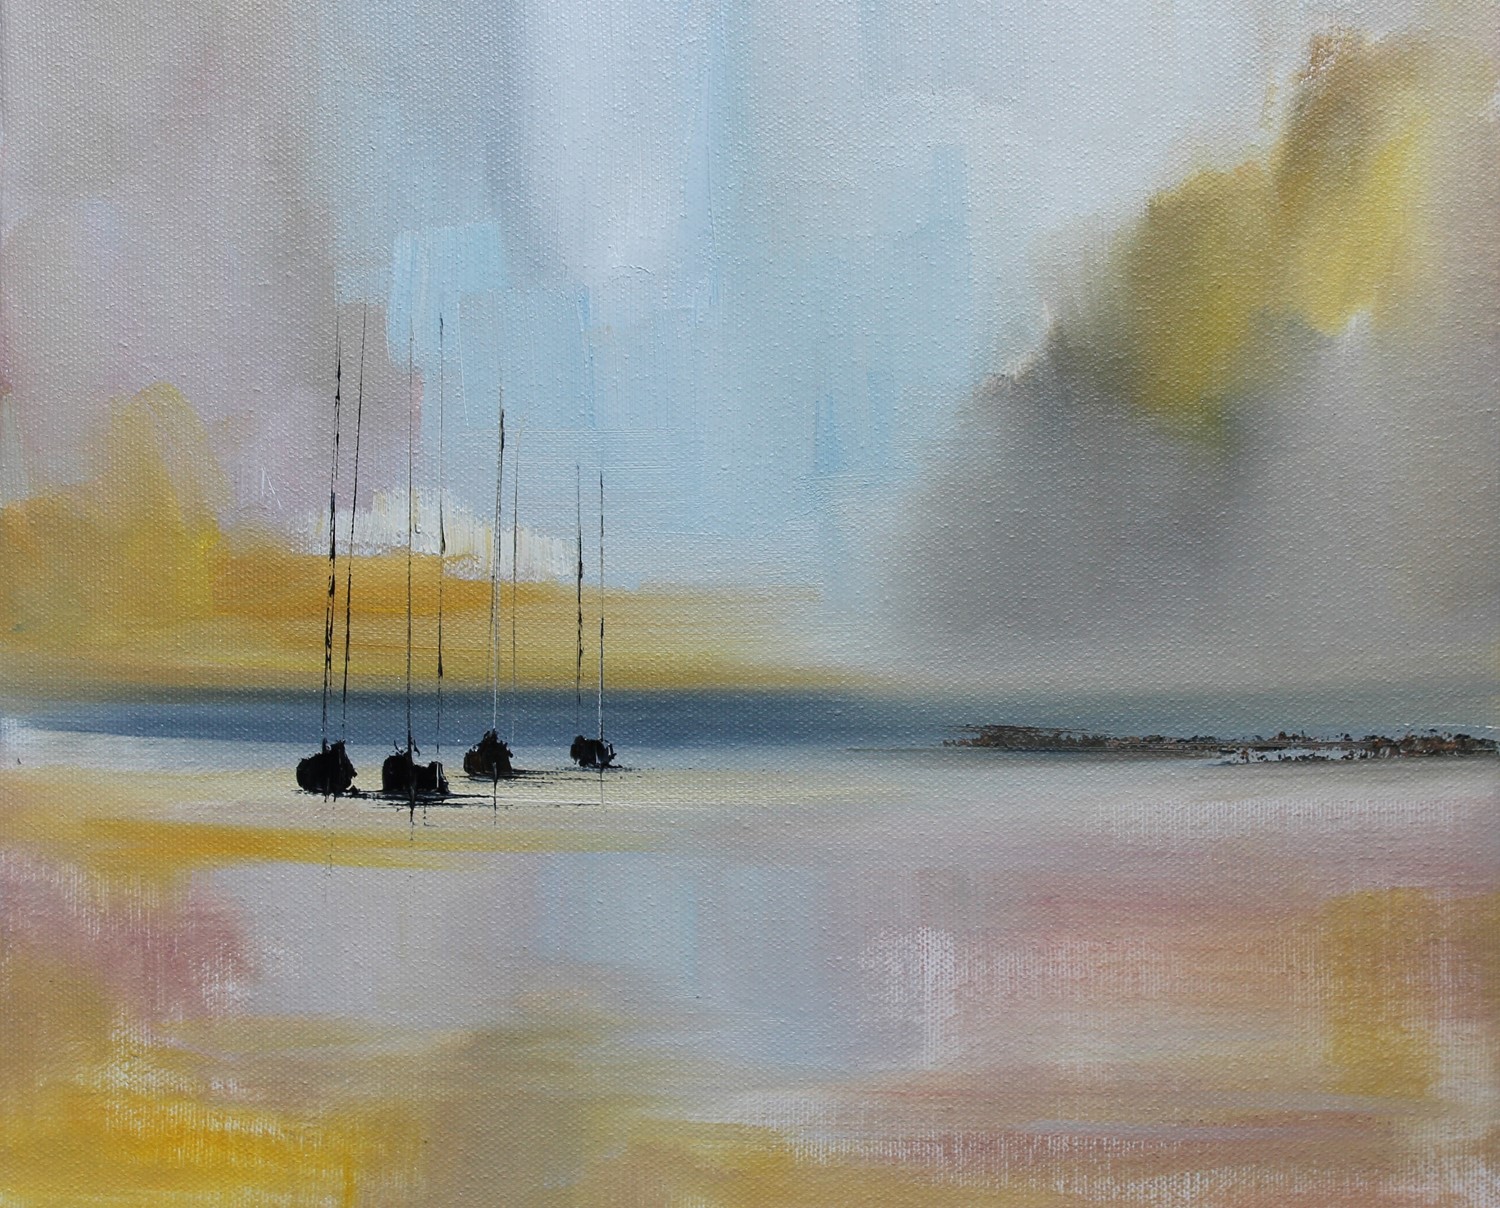 'Four Yachts at Morning Light' by artist Rosanne Barr